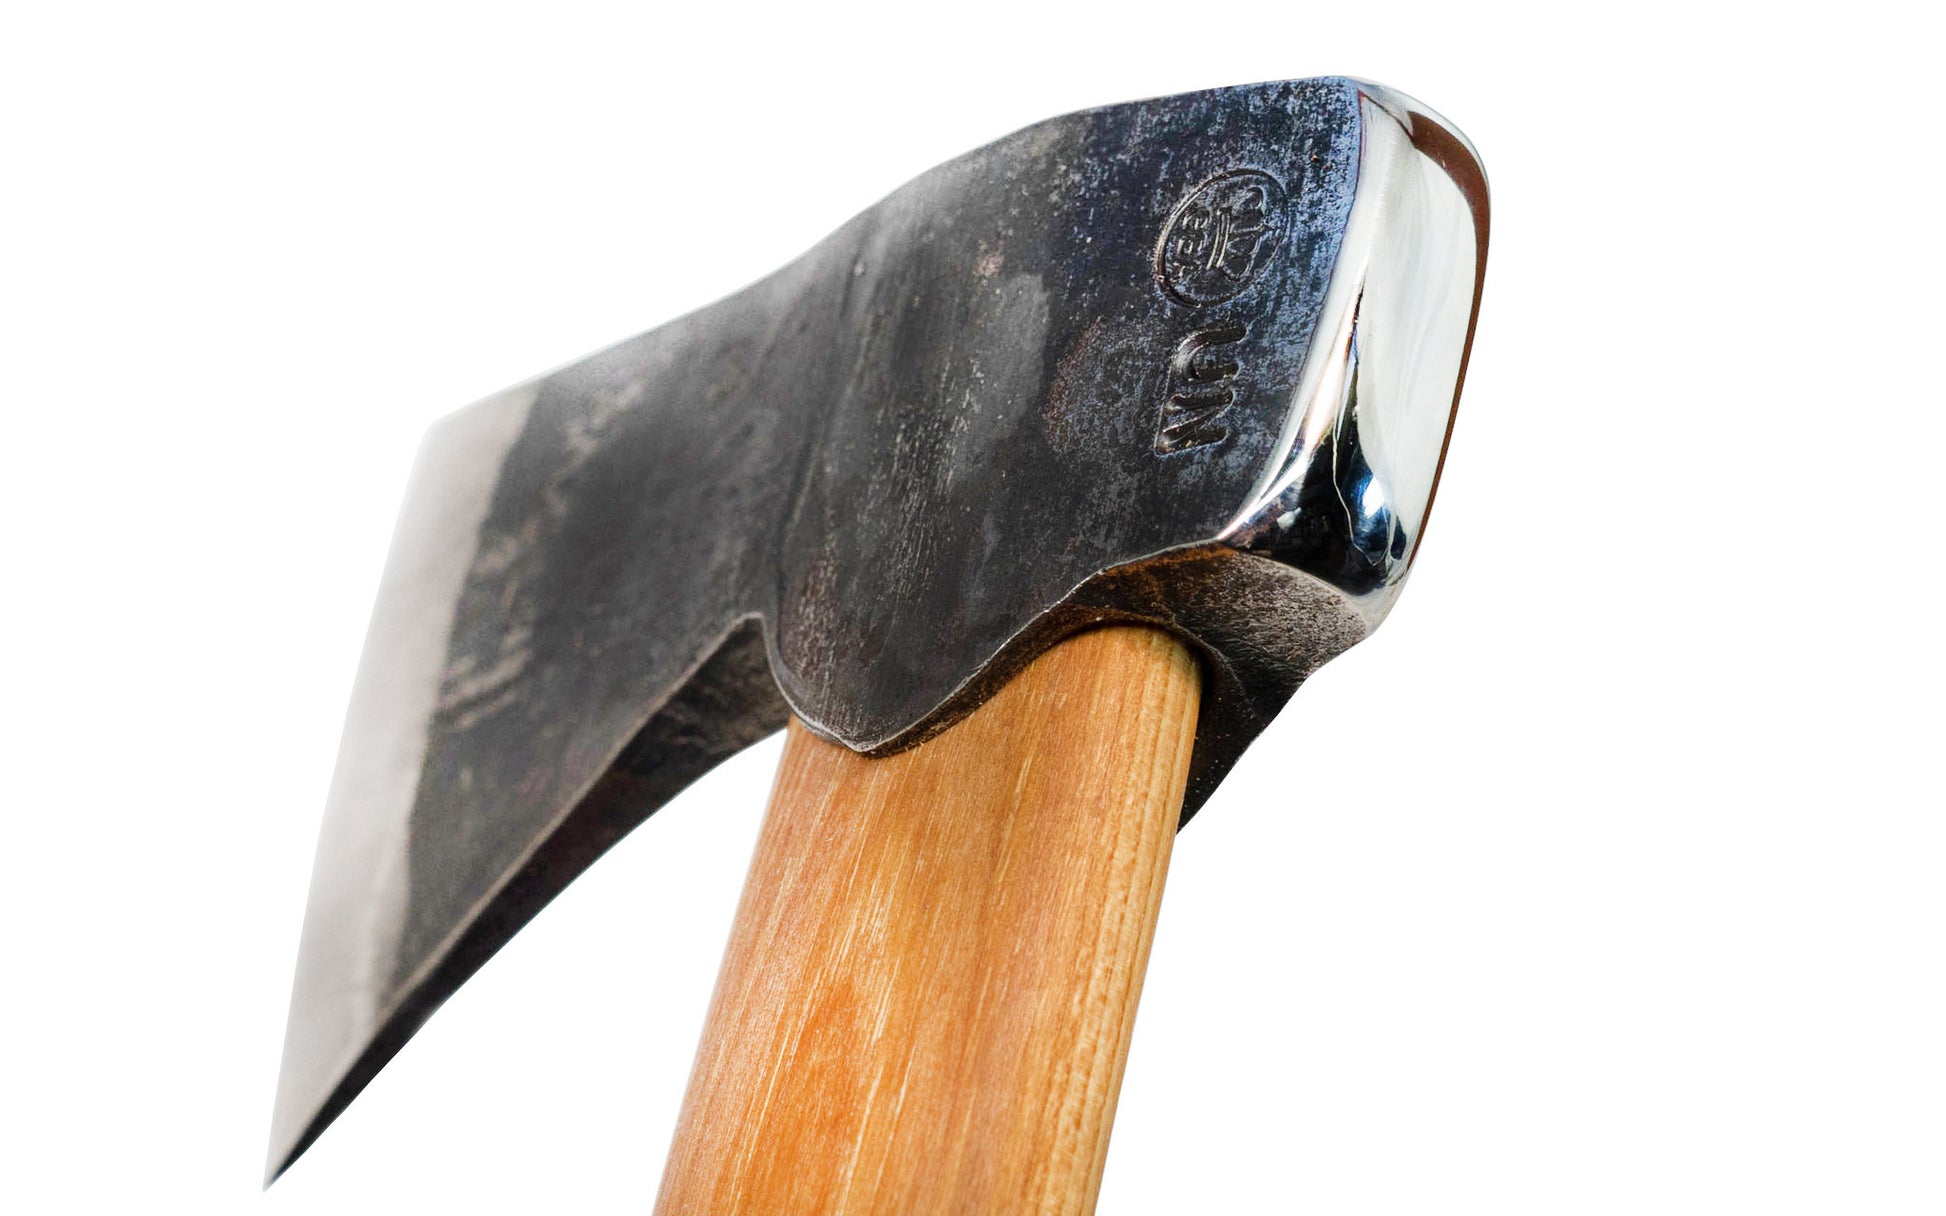 Gransfors Bruk Hunter's Axe No. 418 - Special "Flay Poll" for Skinning Animals